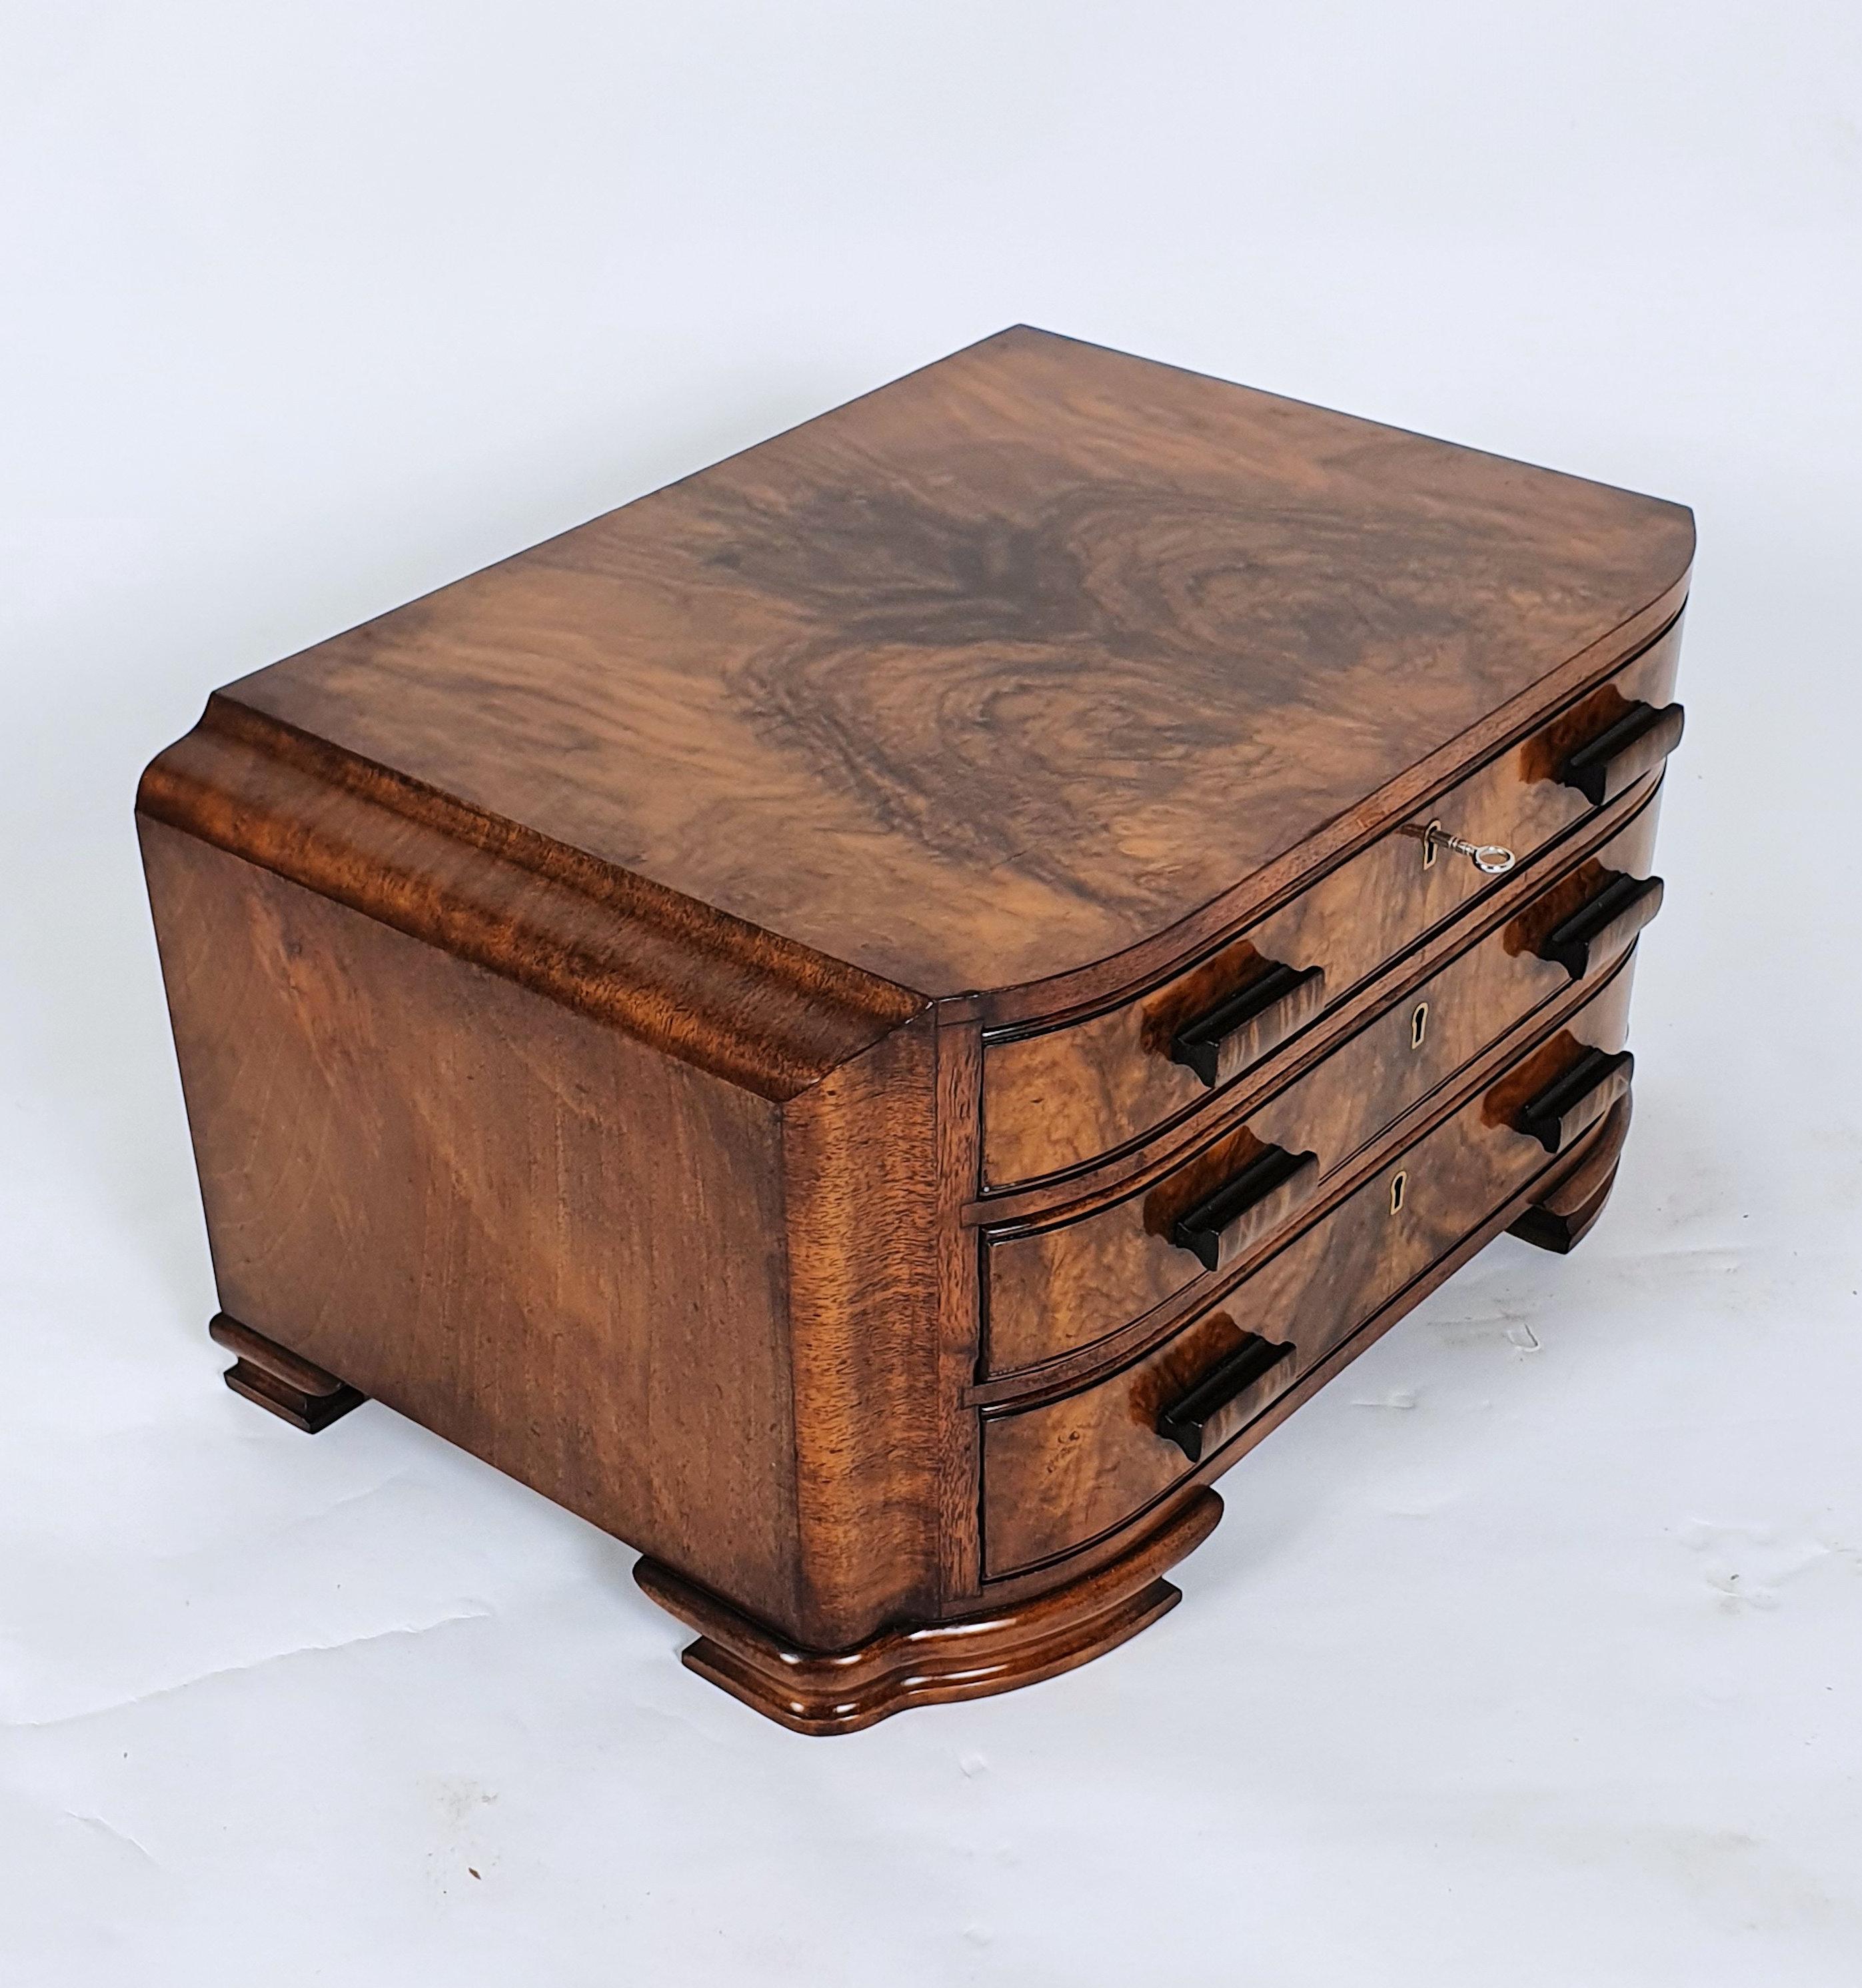 This beautiful Art Deco figured walnut bow fronted chest fitted with 3 drawers with a quantity of silver plated cutlery. The contents include 12 table knives,11 cheese knives,12 table forks,3 piece carving set,11 fish knives,12 fish forks,10